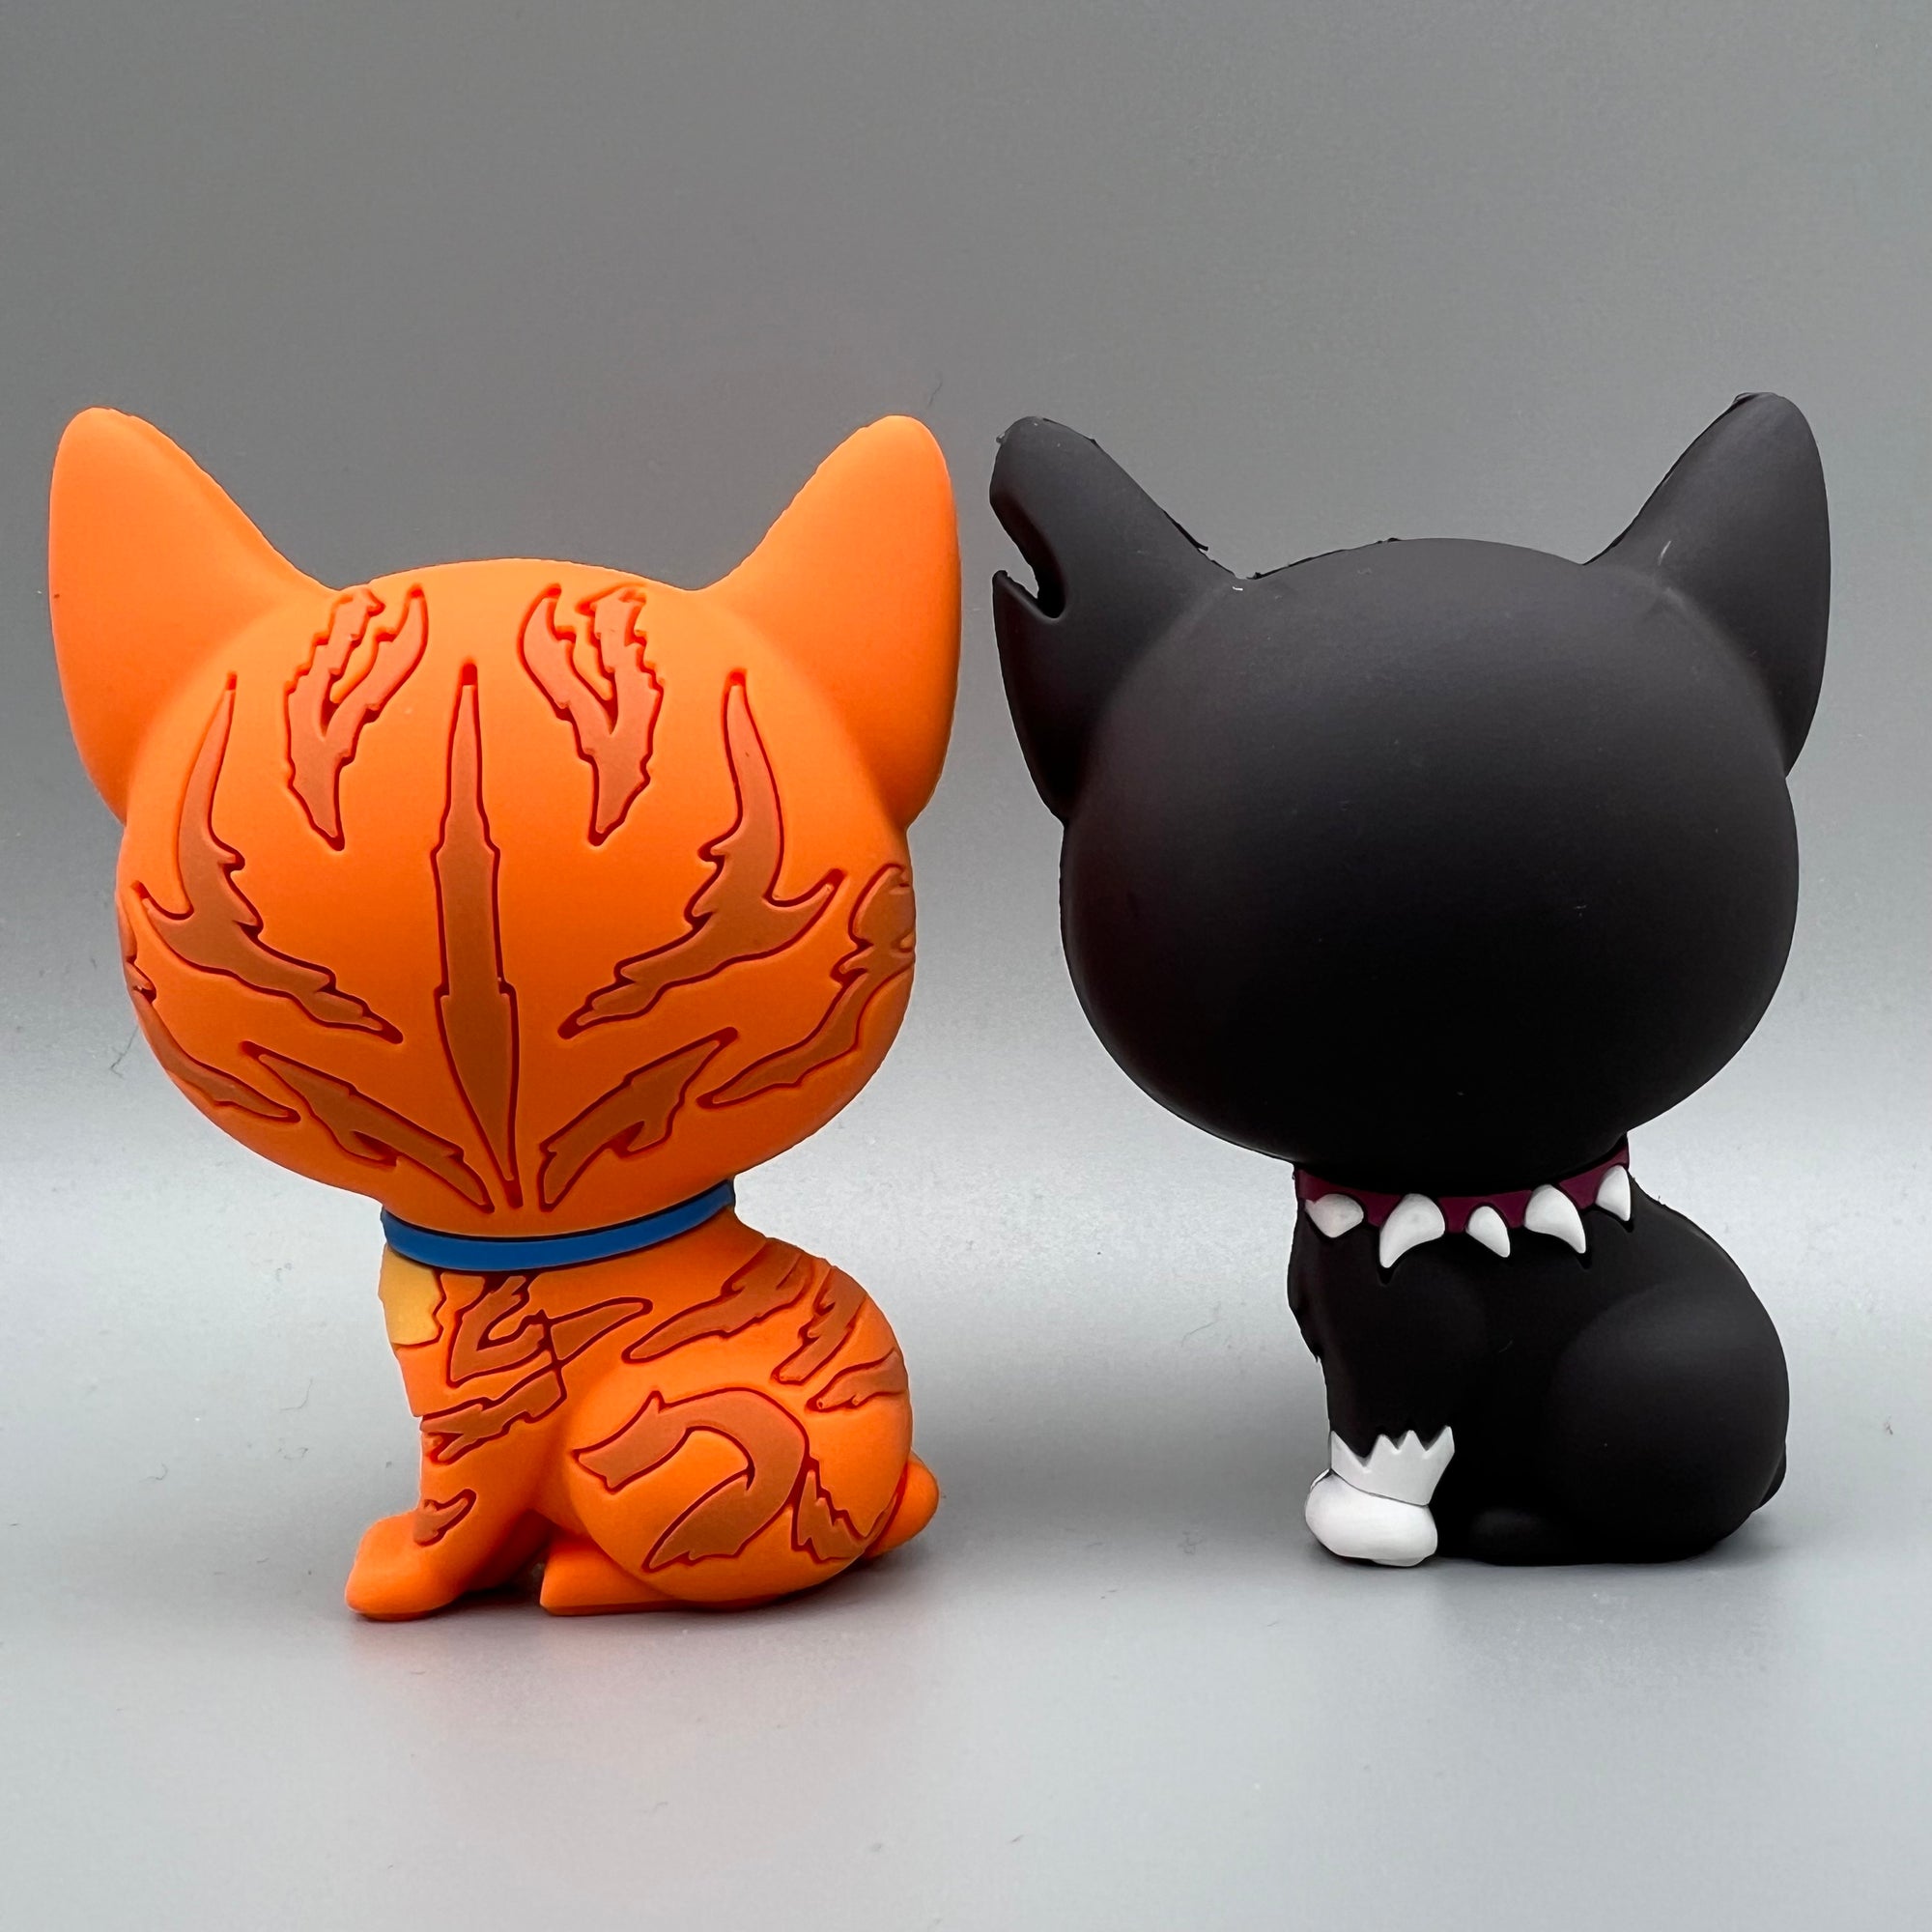 Mudclaw and Ashfur - Mini Collector Figures (Series 3)